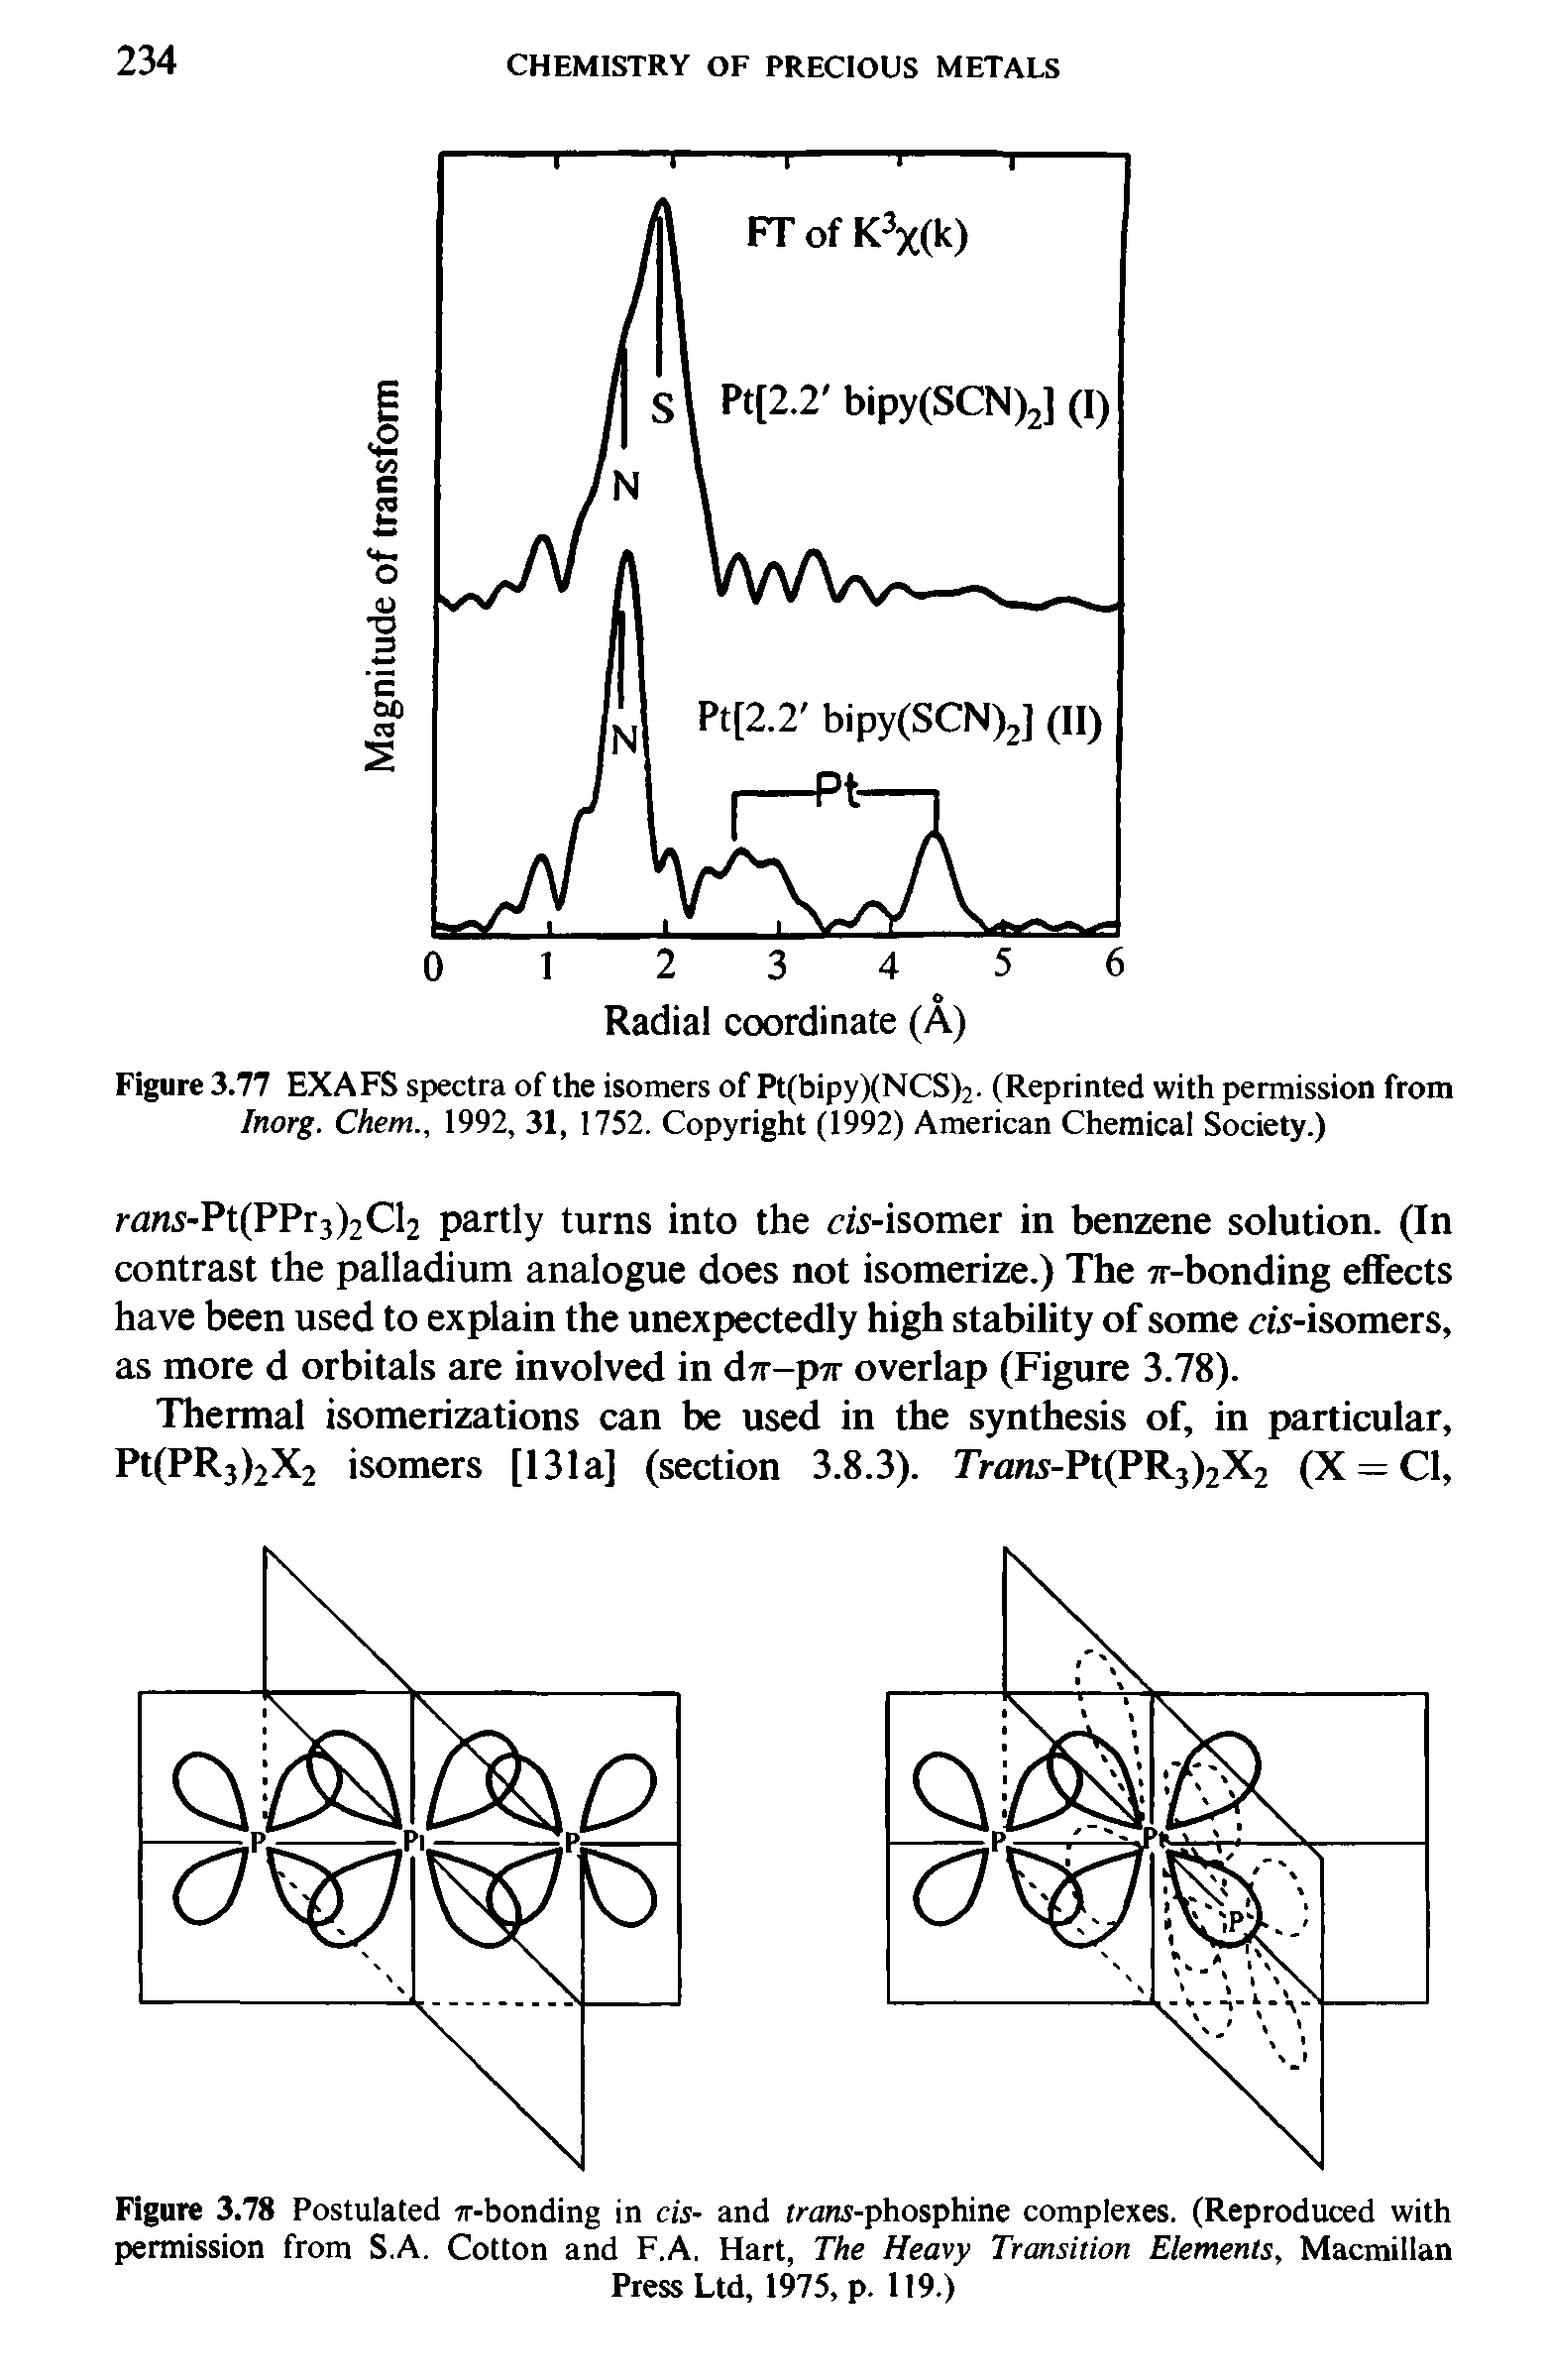 Figure 3.77 EXAFS spectra of the isomers of Pt(bipy)(NCS)2. (Reprinted with permission from Inorg. Chem., 1992, 31, 1752. Copyright (1992) American Chemical Society.)...